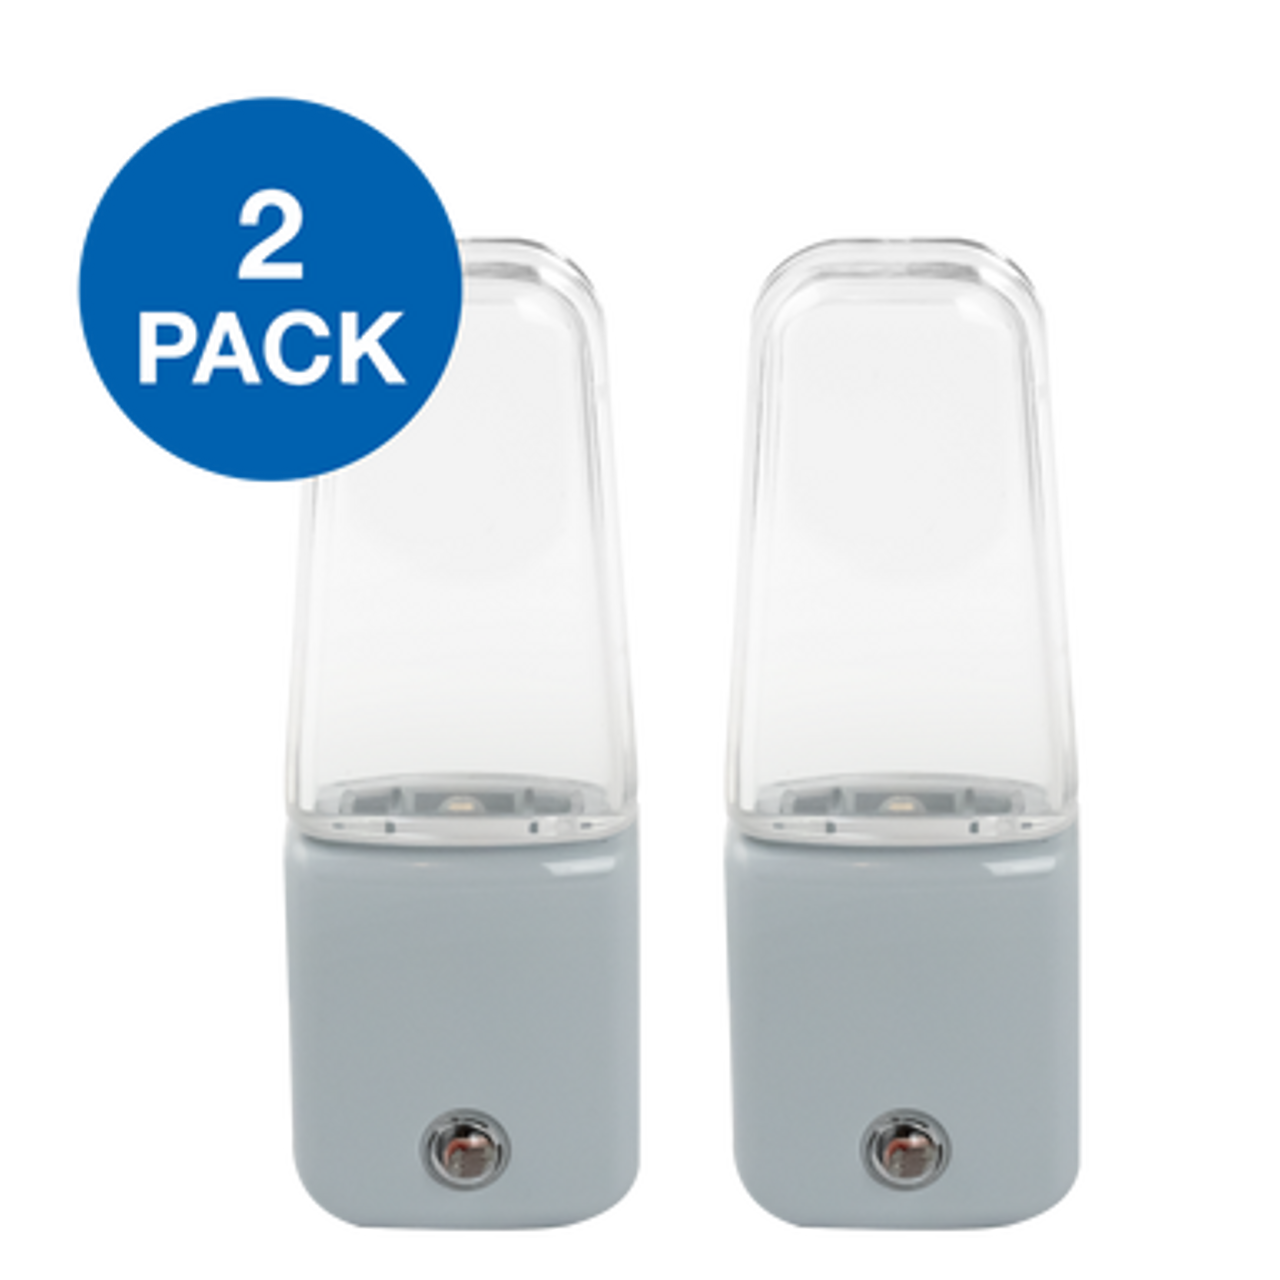 2 LED Night Lights with 2-pack label